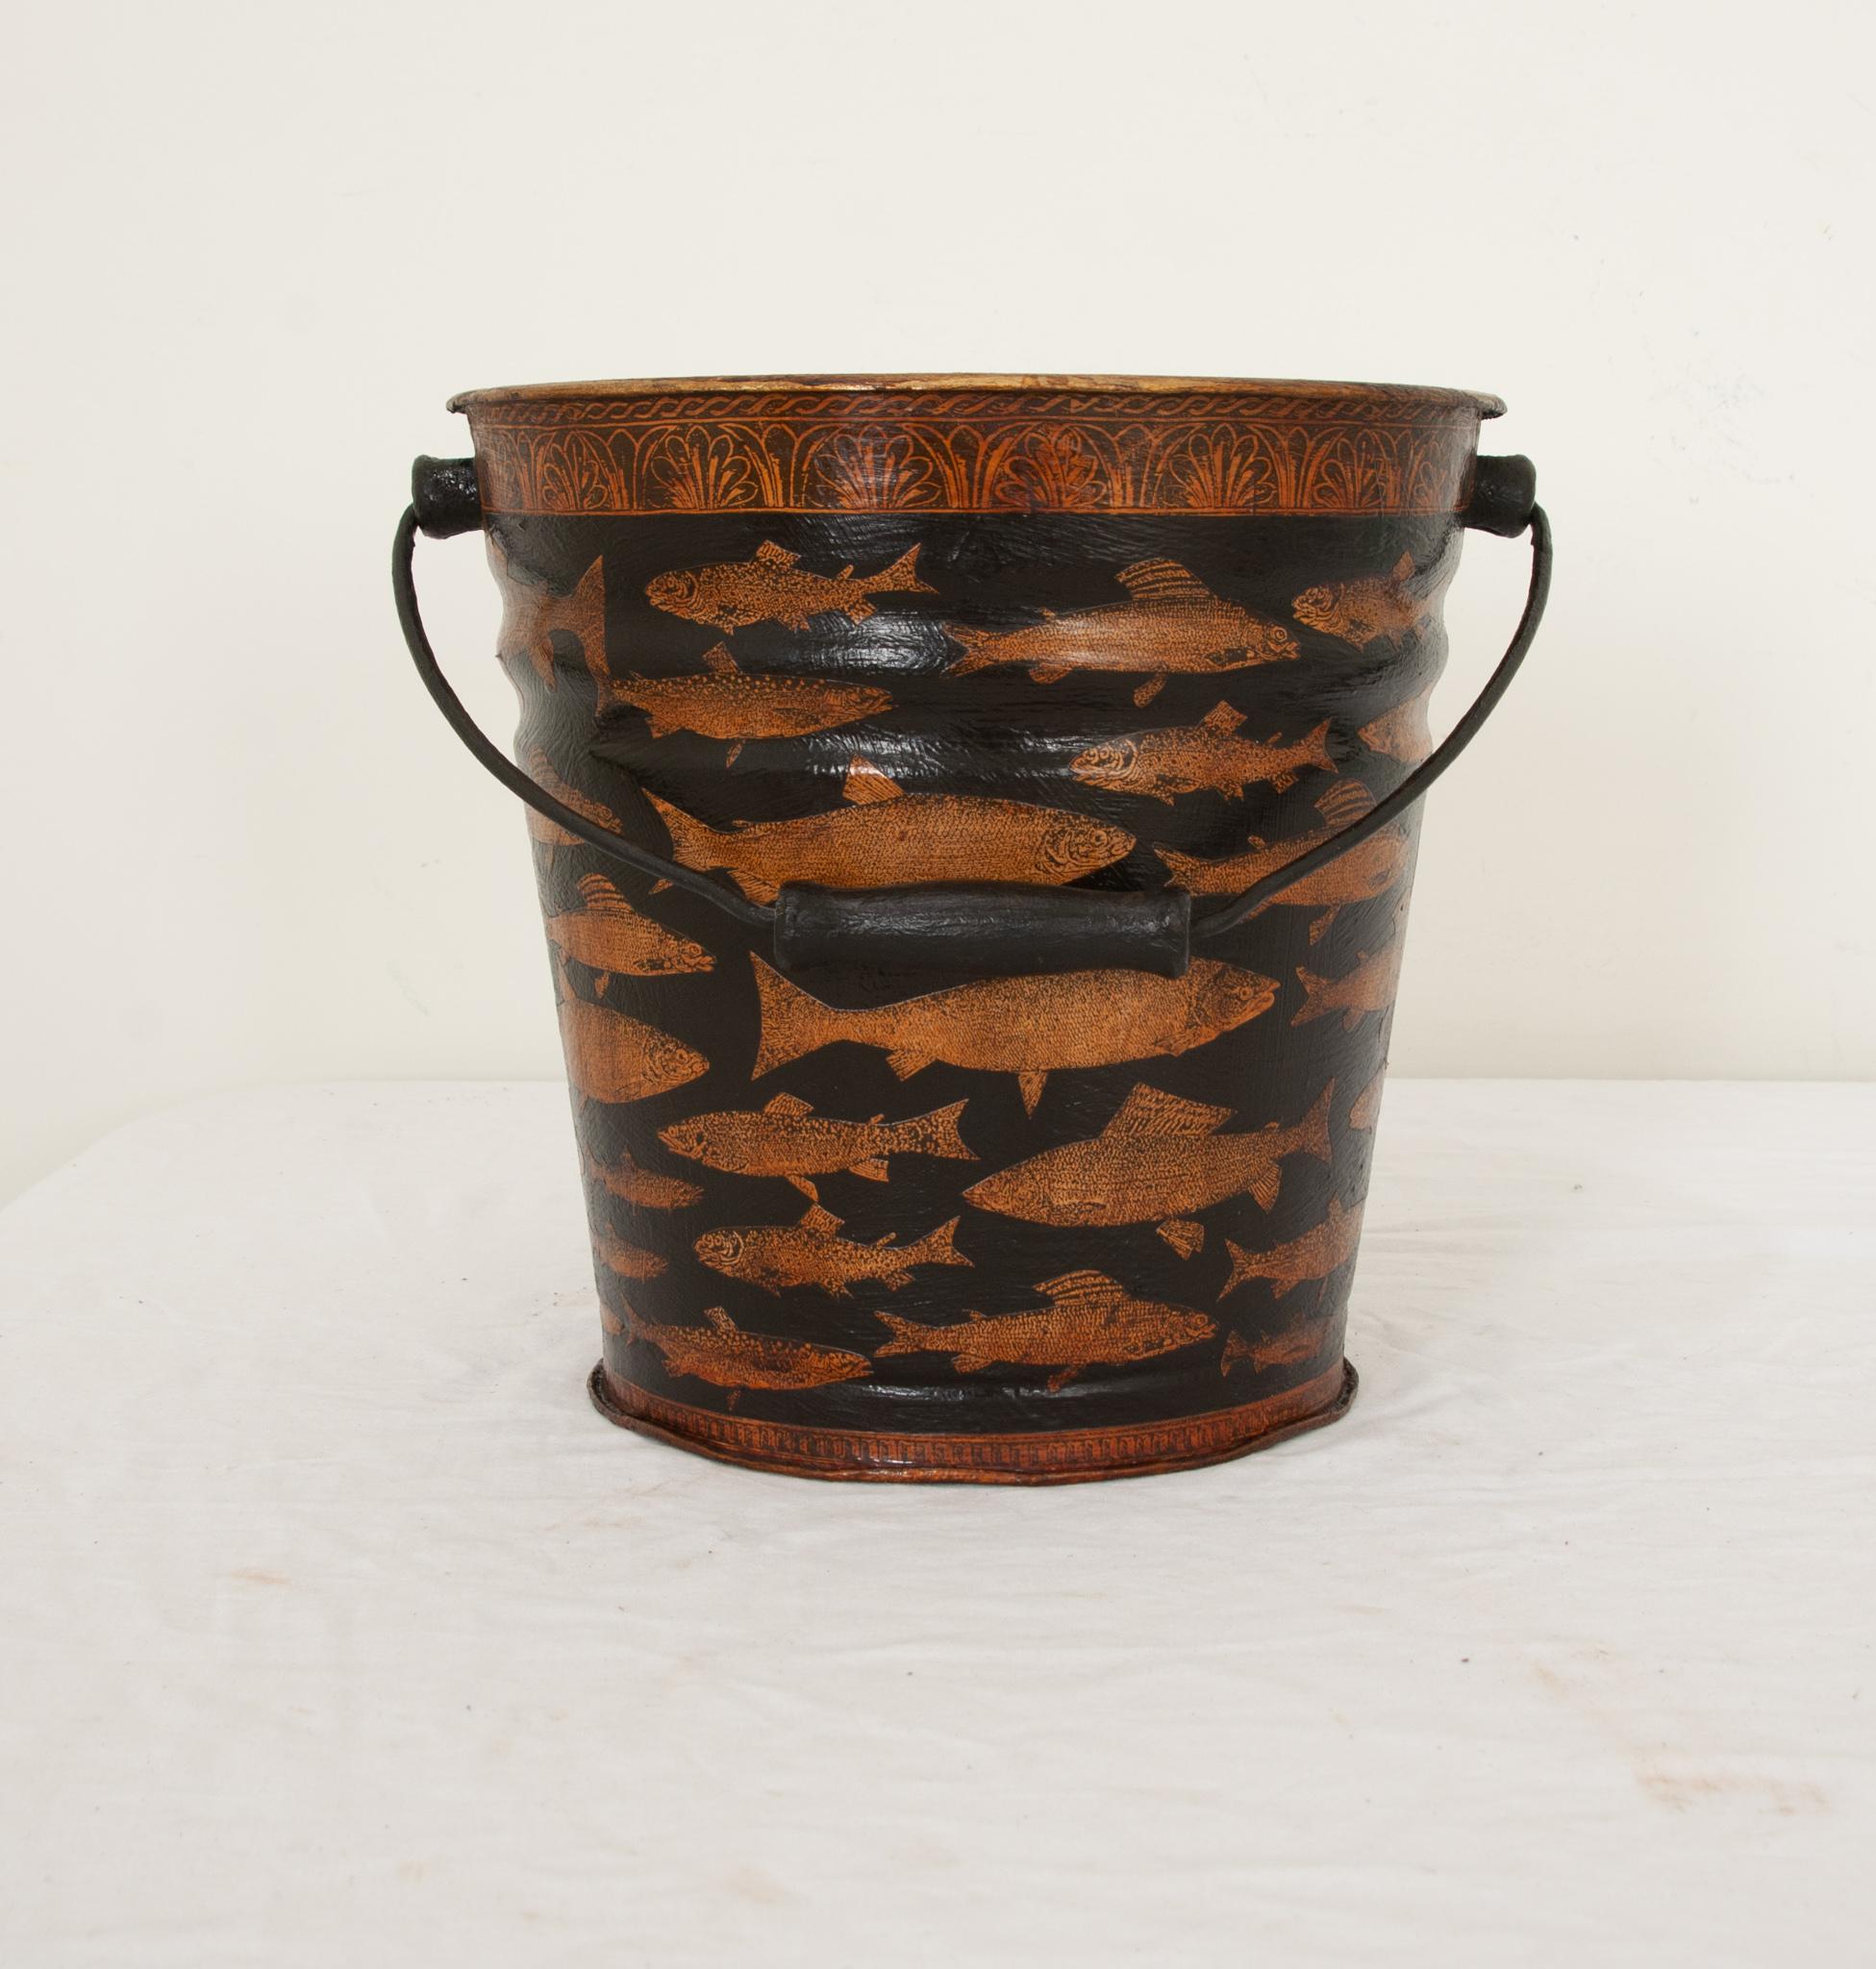 An English vintage metal pail recently painted black and decoupaged with an attractive pattern of fish. Handmade in southern England, this vintage bucket has been recently restored and decoupaged with a pattern of an eye-catching variety of fish and